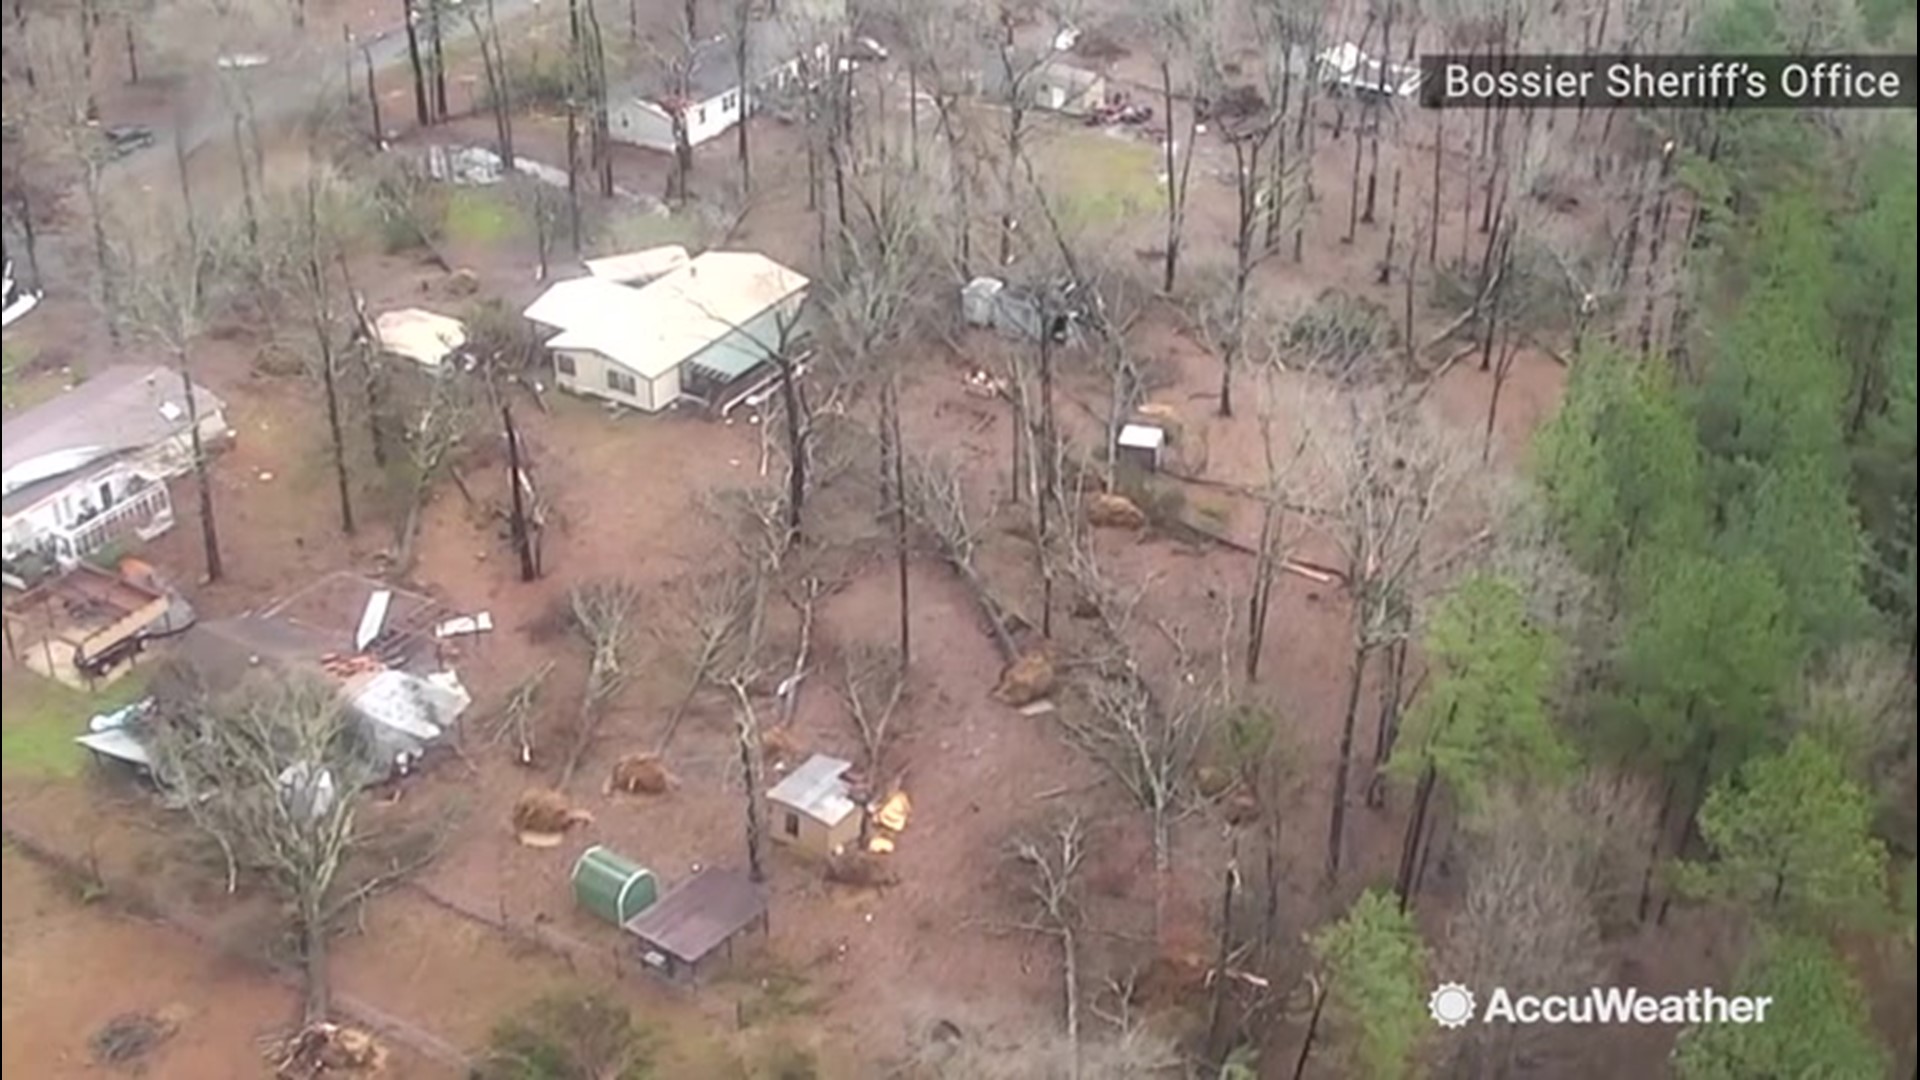 Buidlings were damaged and trees were ripped out of the ground on Jan. 11, when tornadic winds ripped through Haughton, Louisiana.